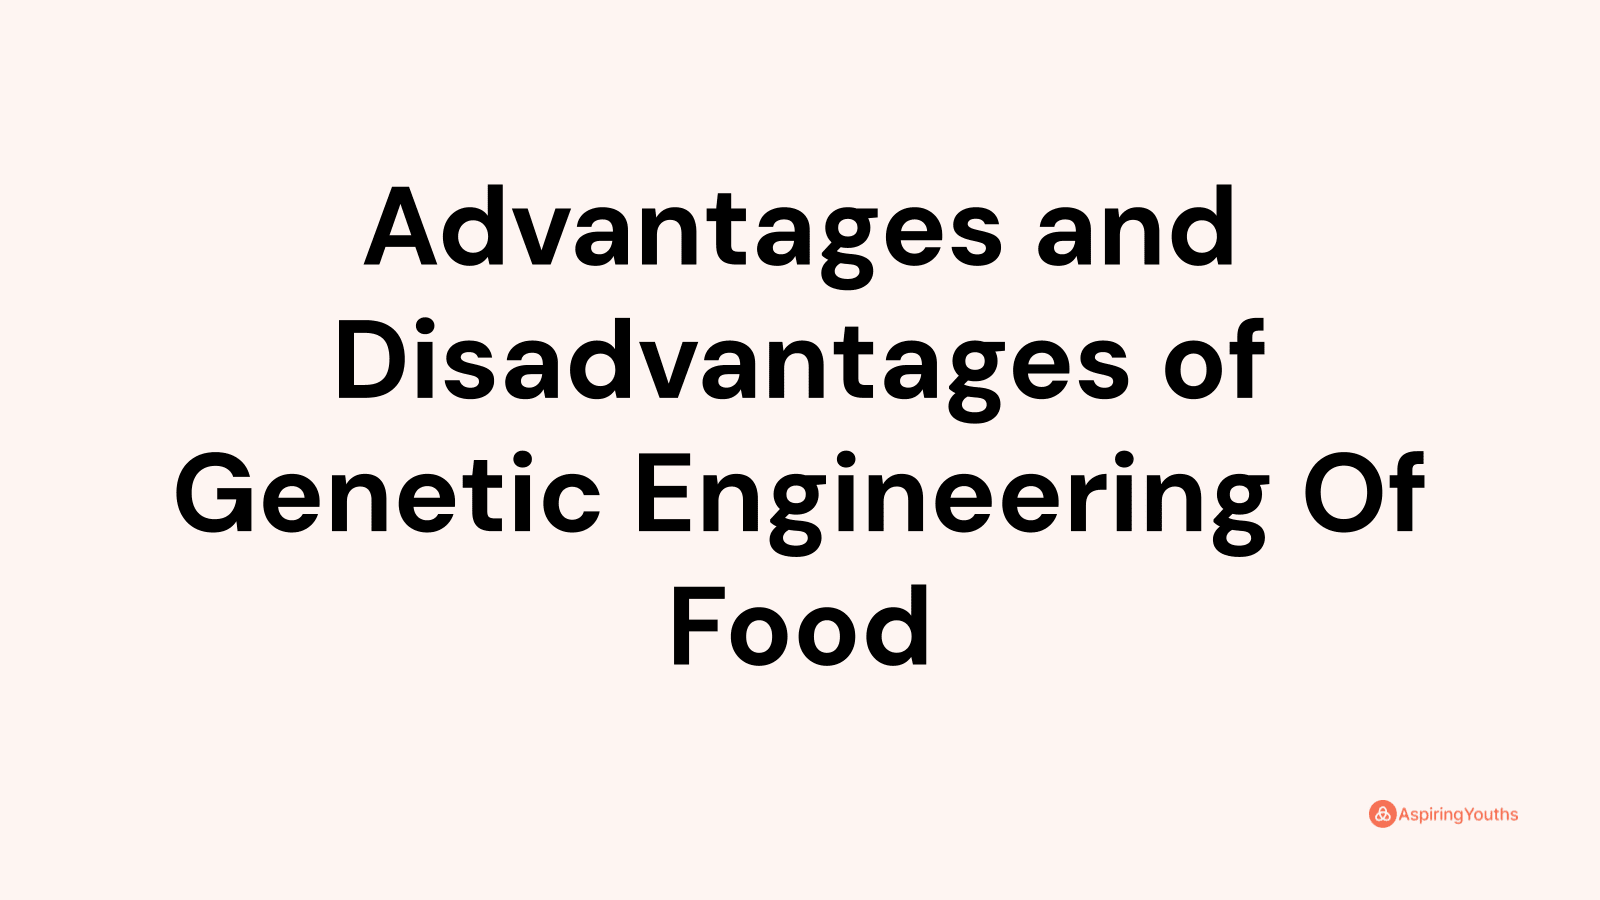 Advantages and disadvantages of Genetic Engineering Of Food